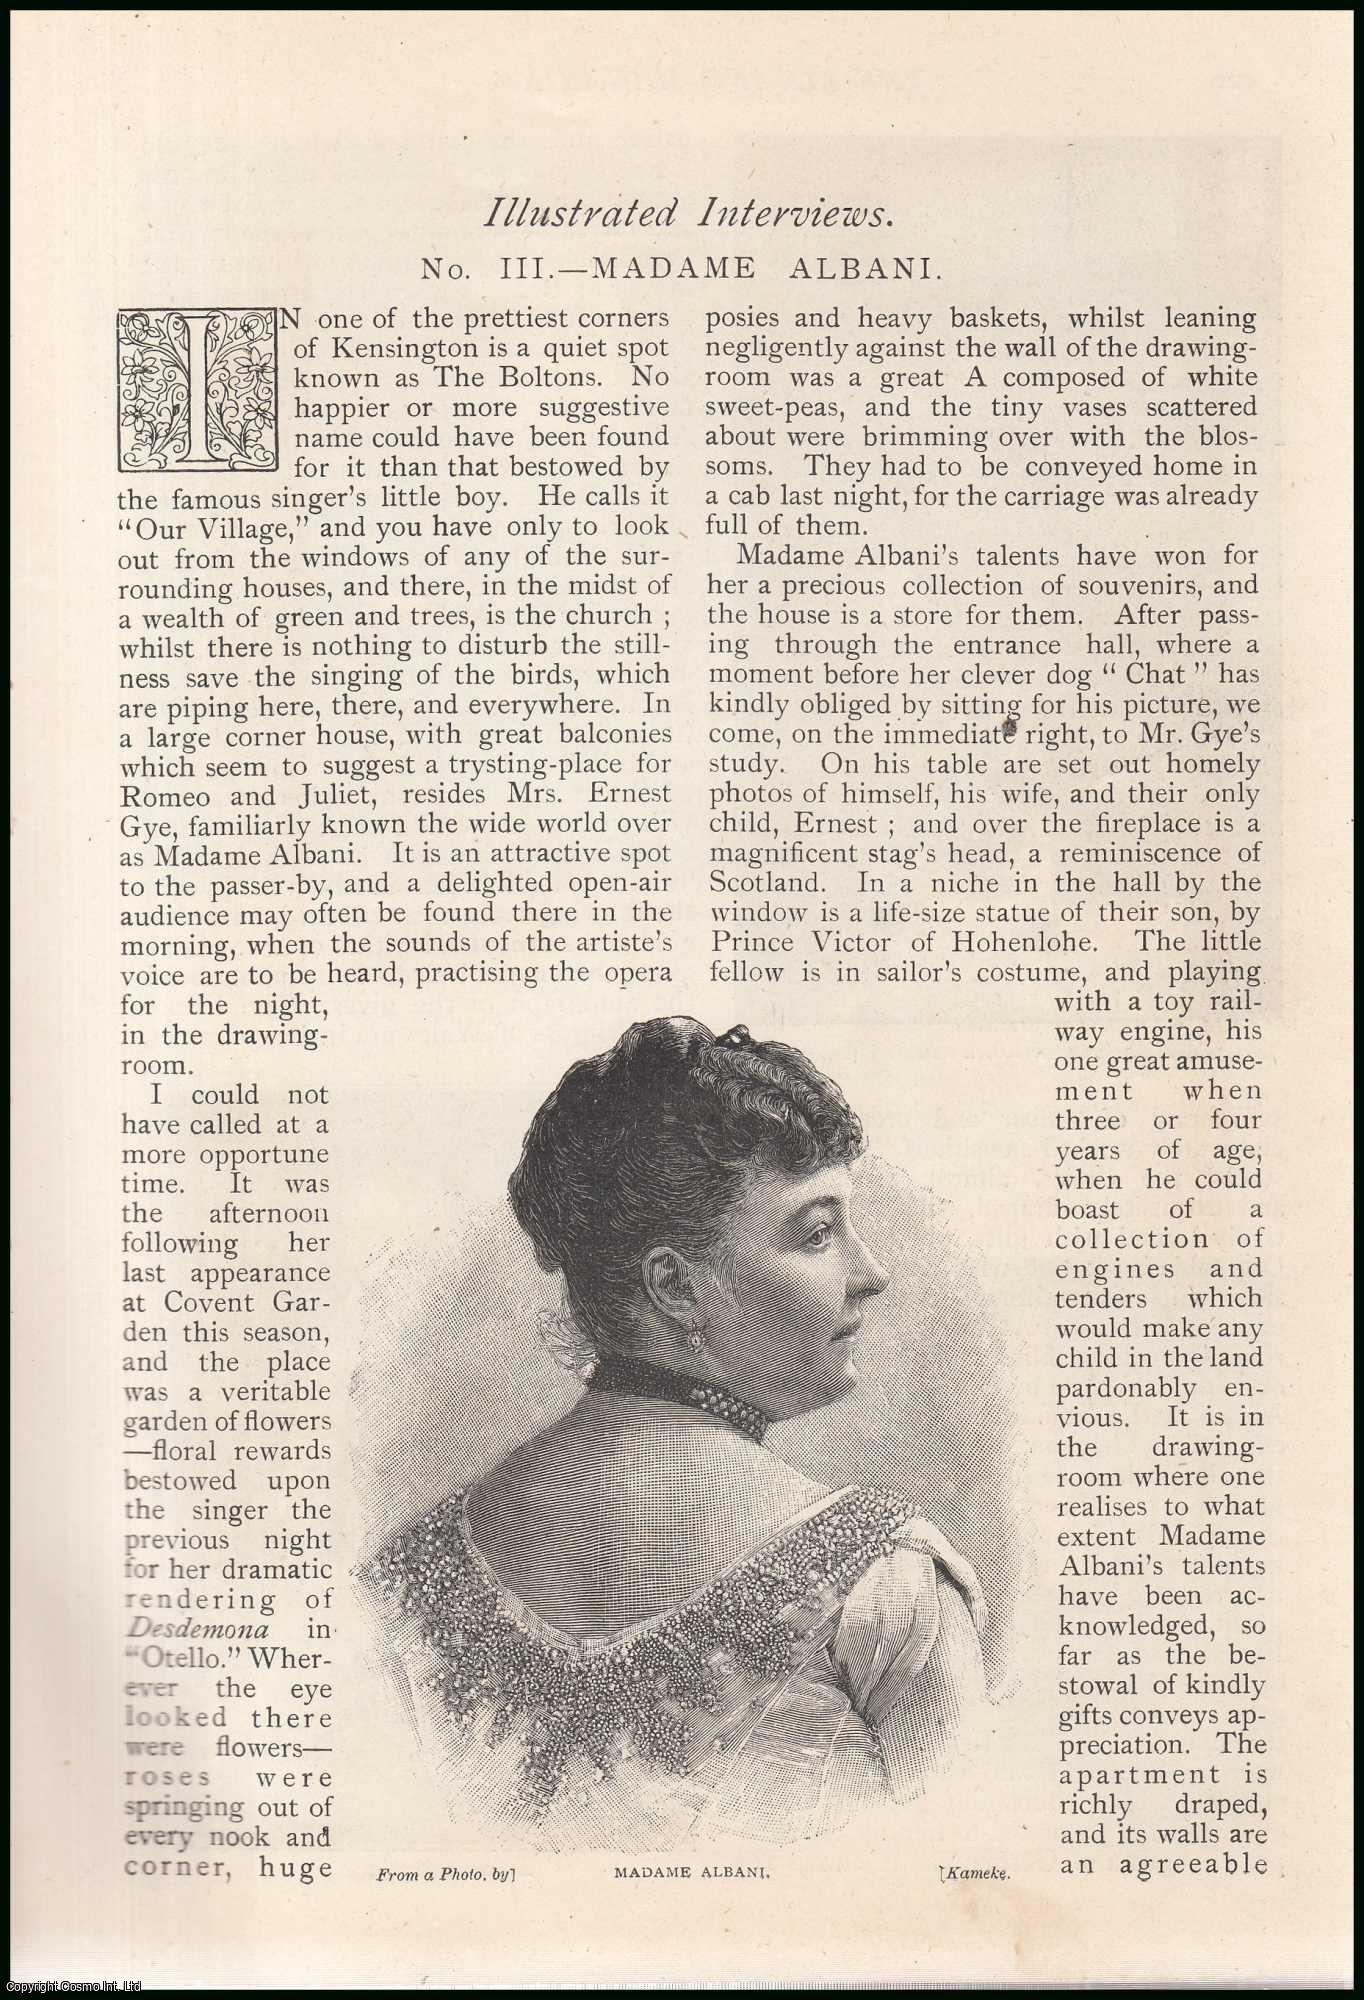 Unstated - Madame Emma Albani : Illustrated Interview. Emma was a leading opera soprano of the 19th century and early 20th century, and the first Canadian singer to become an international star. Her repertoire focused on the operas of Mozart, Rossini, Donizetti, Bellini and Wagner. She performed across Europe and North America. An uncommon original article from The Strand Magazine, 1891.